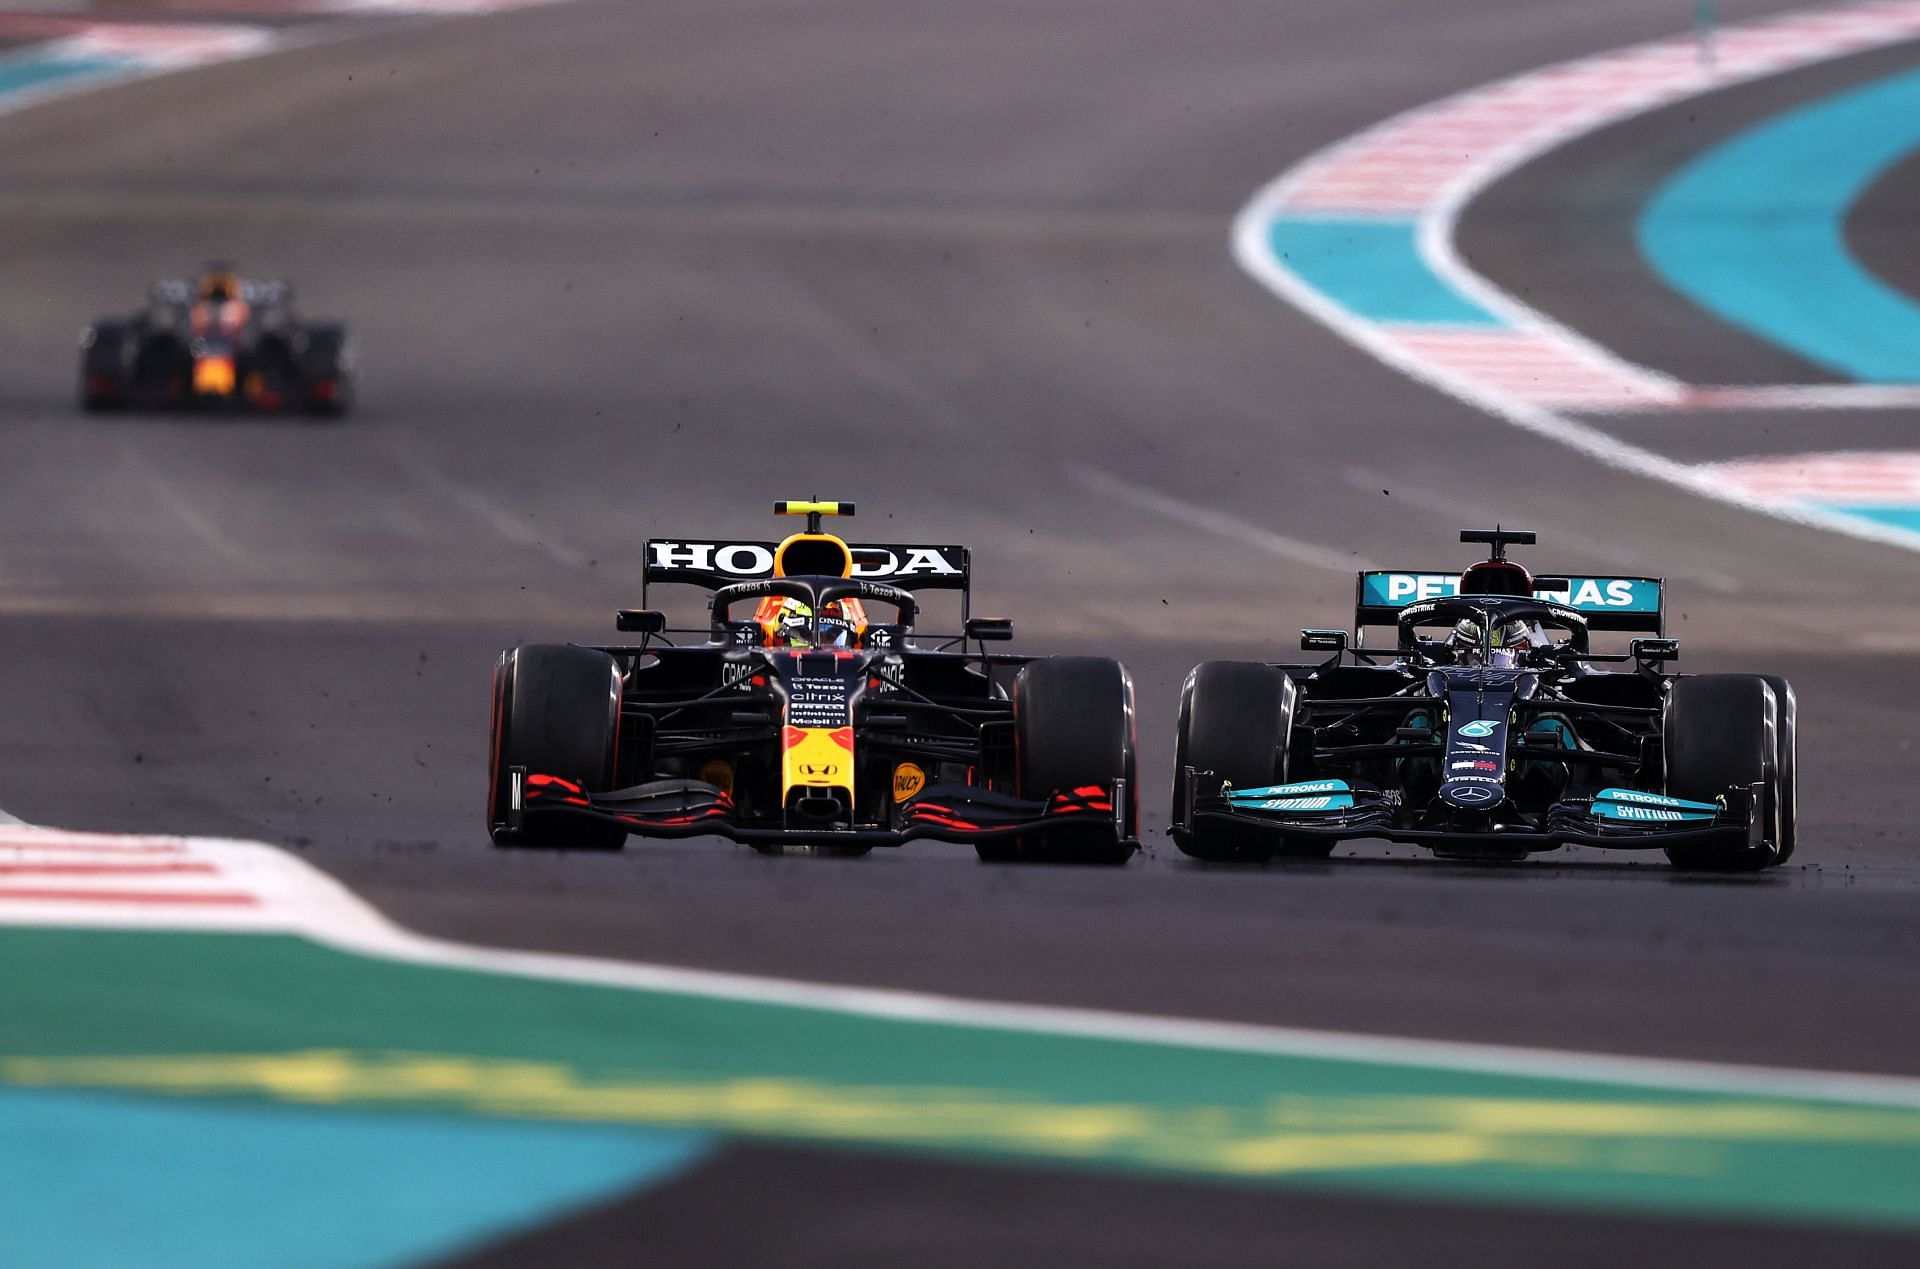 Sergio Perez (#11) Red Bull RB16B, holding off Lewis Hamilton (#44) Mercedes-AMG W13 on lap 21 of the 2021 Abu Dhabi Grand Prix (Photo by Lars Baron/Getty Images)